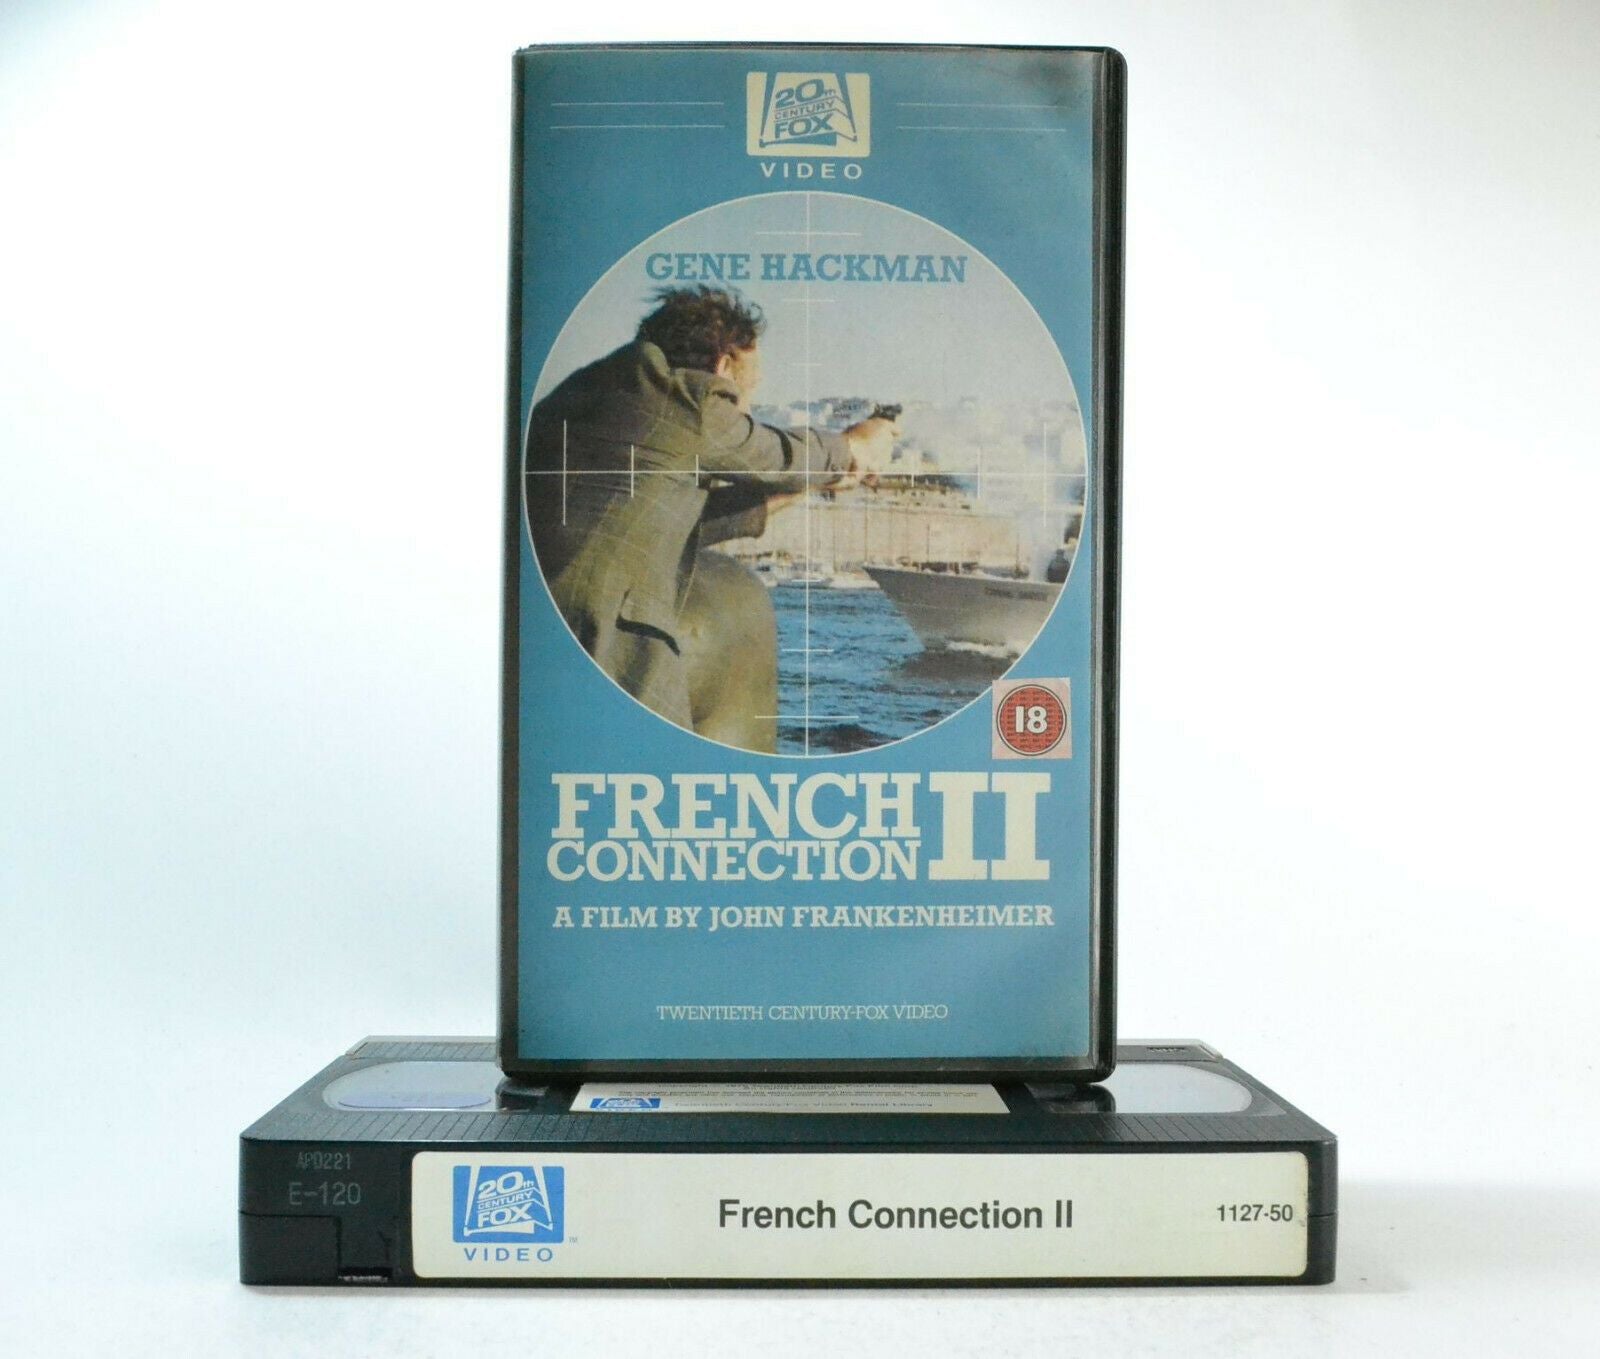 The French Connection 2: (1975) Action Thriller - Gene Hackman - Pre-Cert - VHS-